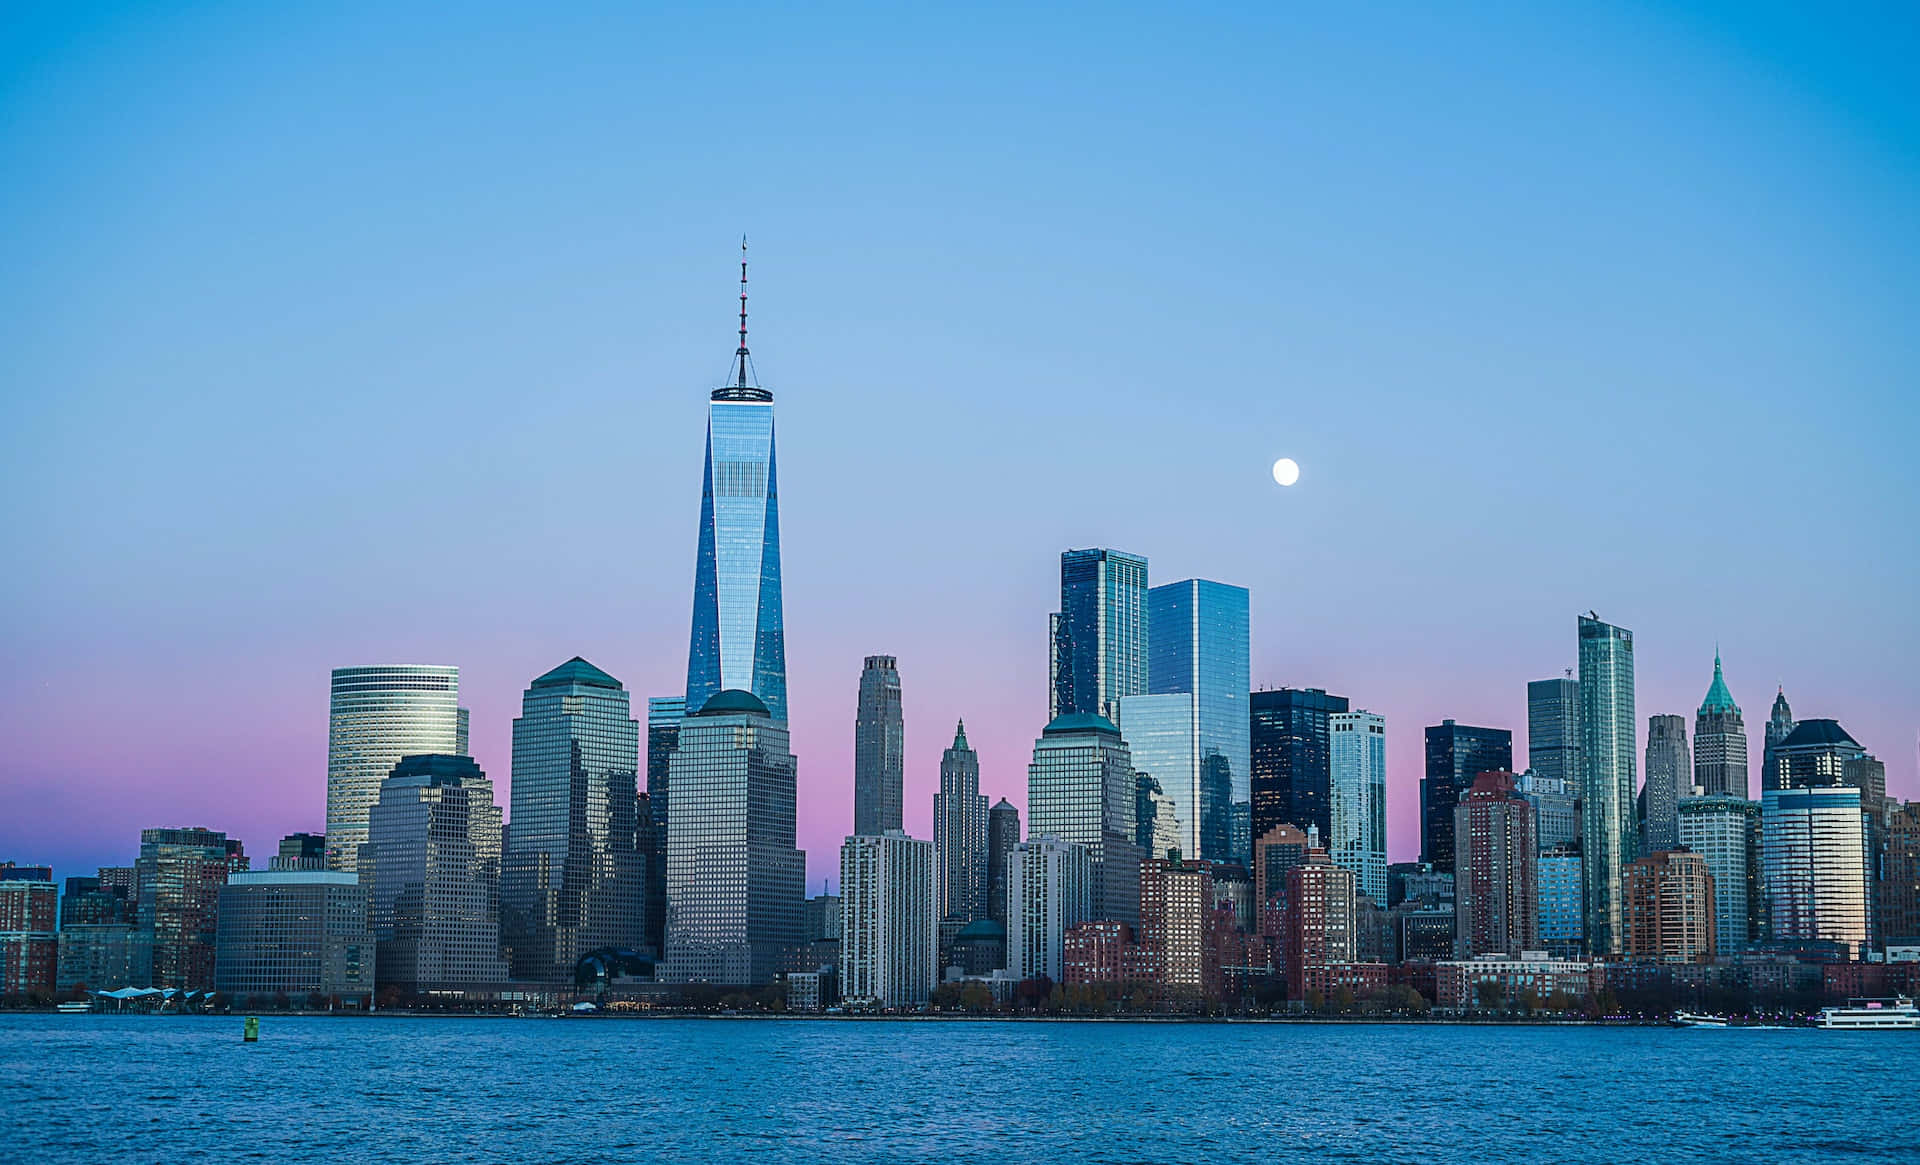 New York Skyscrapers And Freedom Tower With Dusk Sky Wallpaper